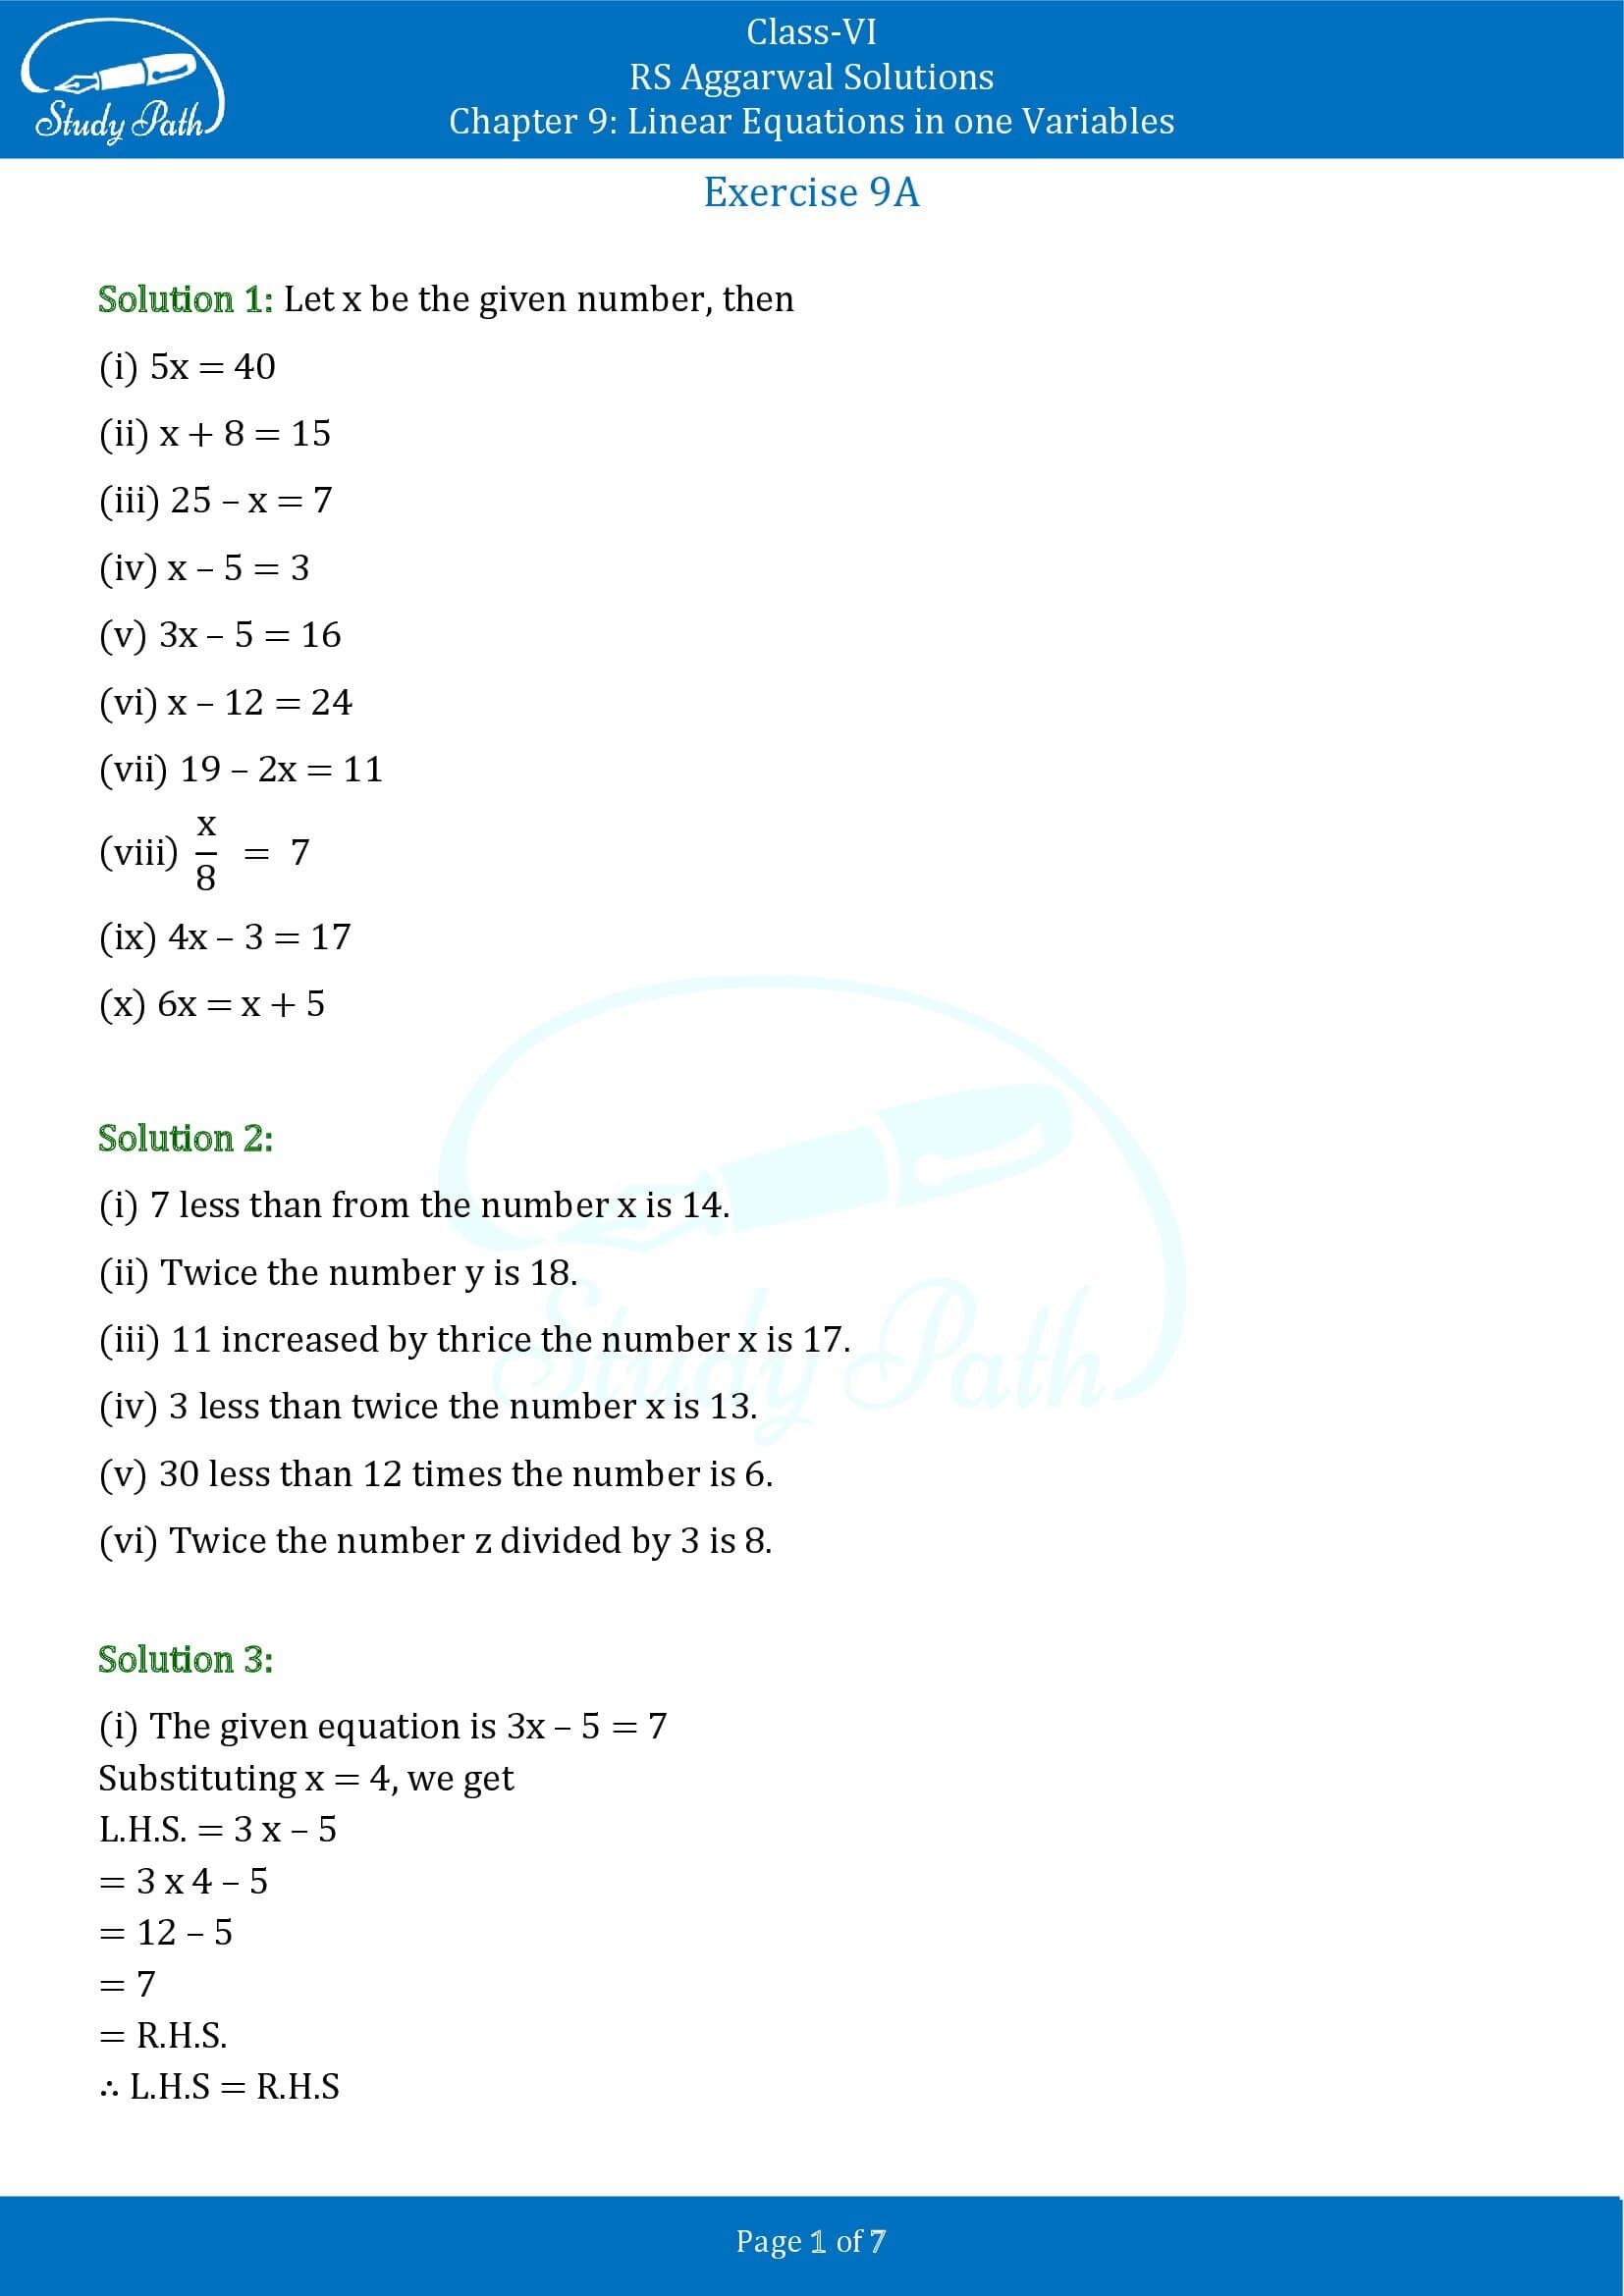 RS Aggarwal Solutions Class 6 Chapter 9 Linear Equations in One Variable Exercise 9A 00001